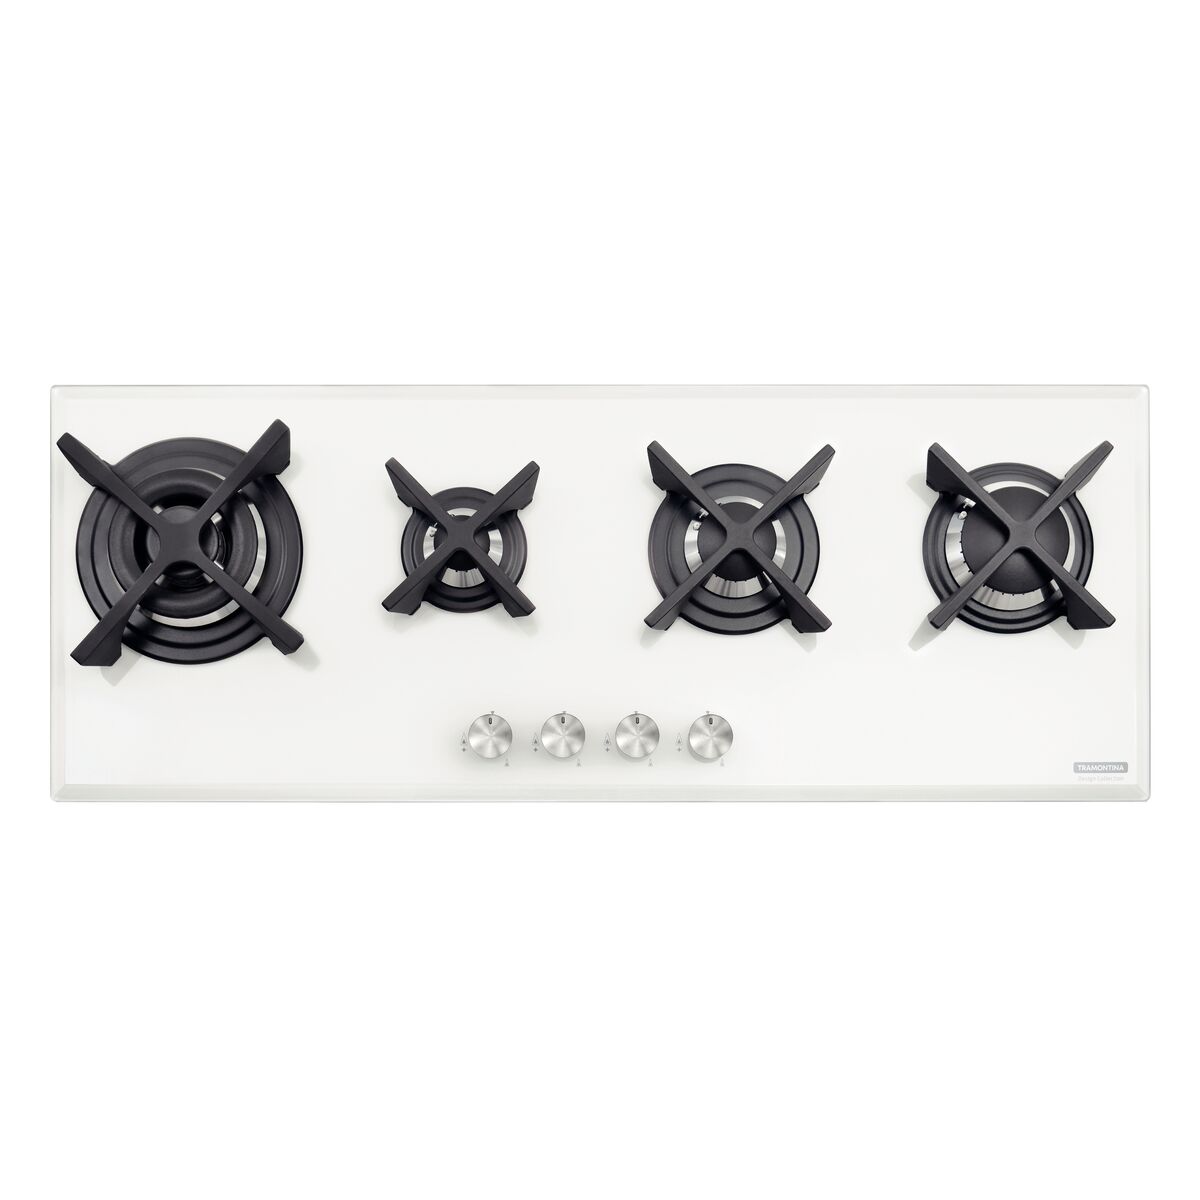 Tramontina Design Collection Prime Linear white tempered glass gas cooktop with cast iron trivets, auto spark and 4 burners